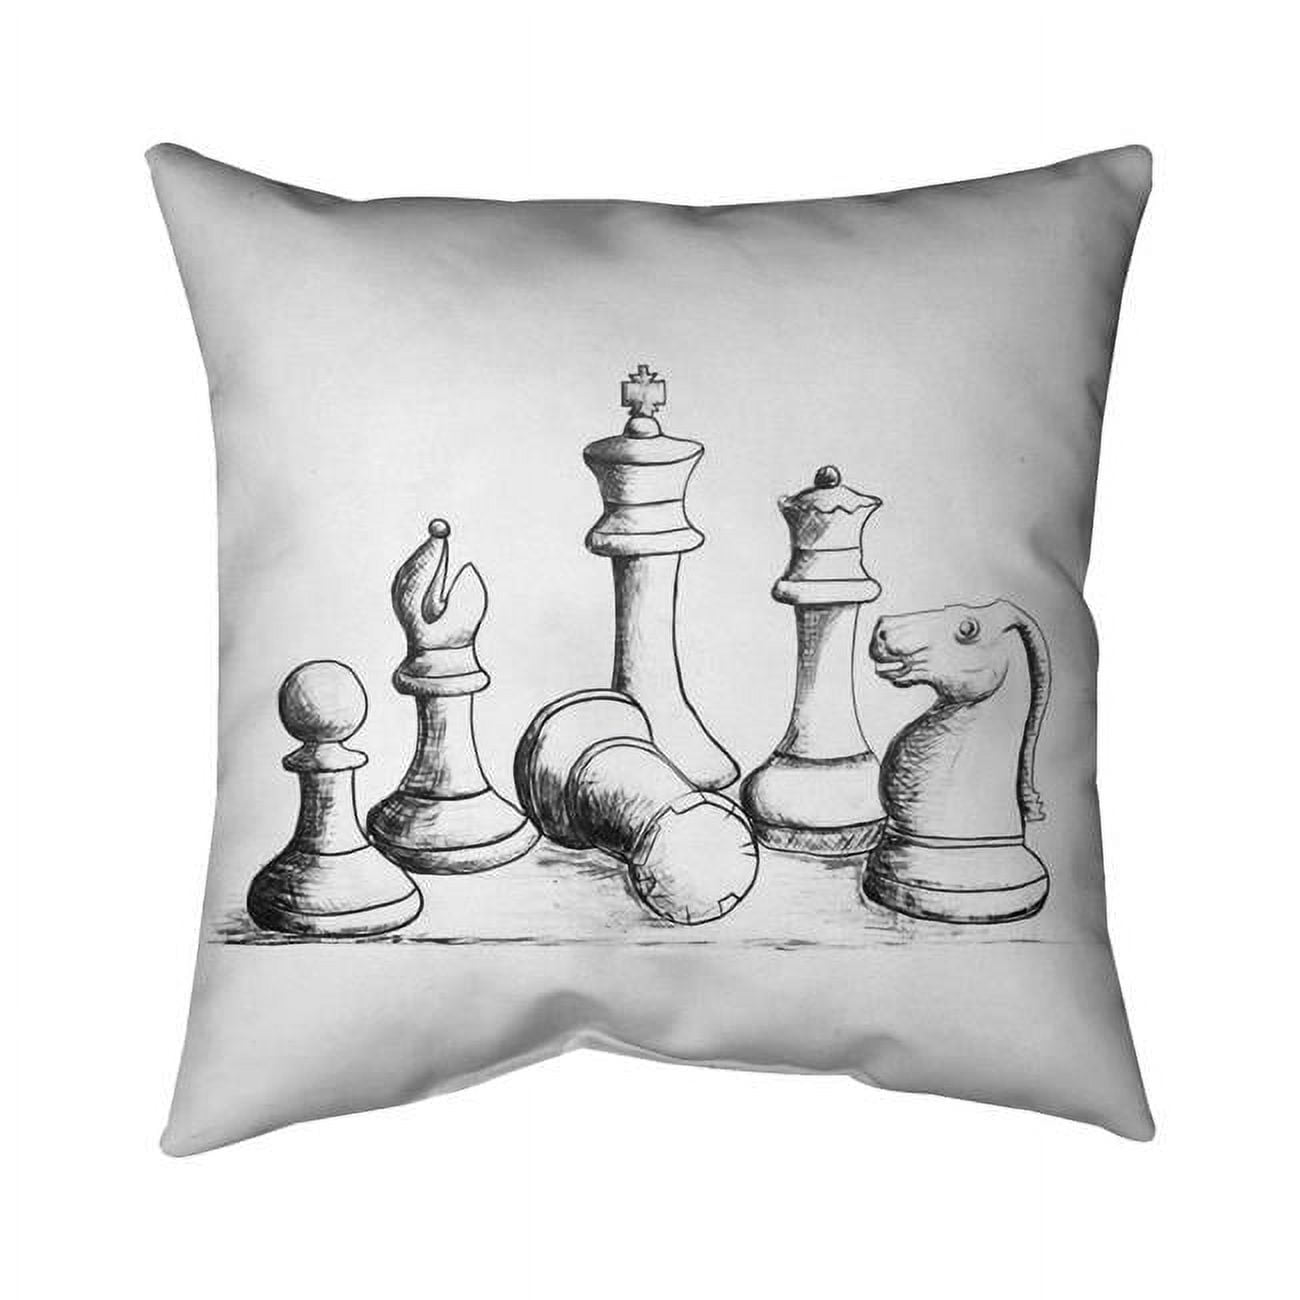 Begin Home Decor 5542-1616-SP62 16 x 16 in. Chess Game Pieces-Double Sided Print Outdoor Pillow Cover